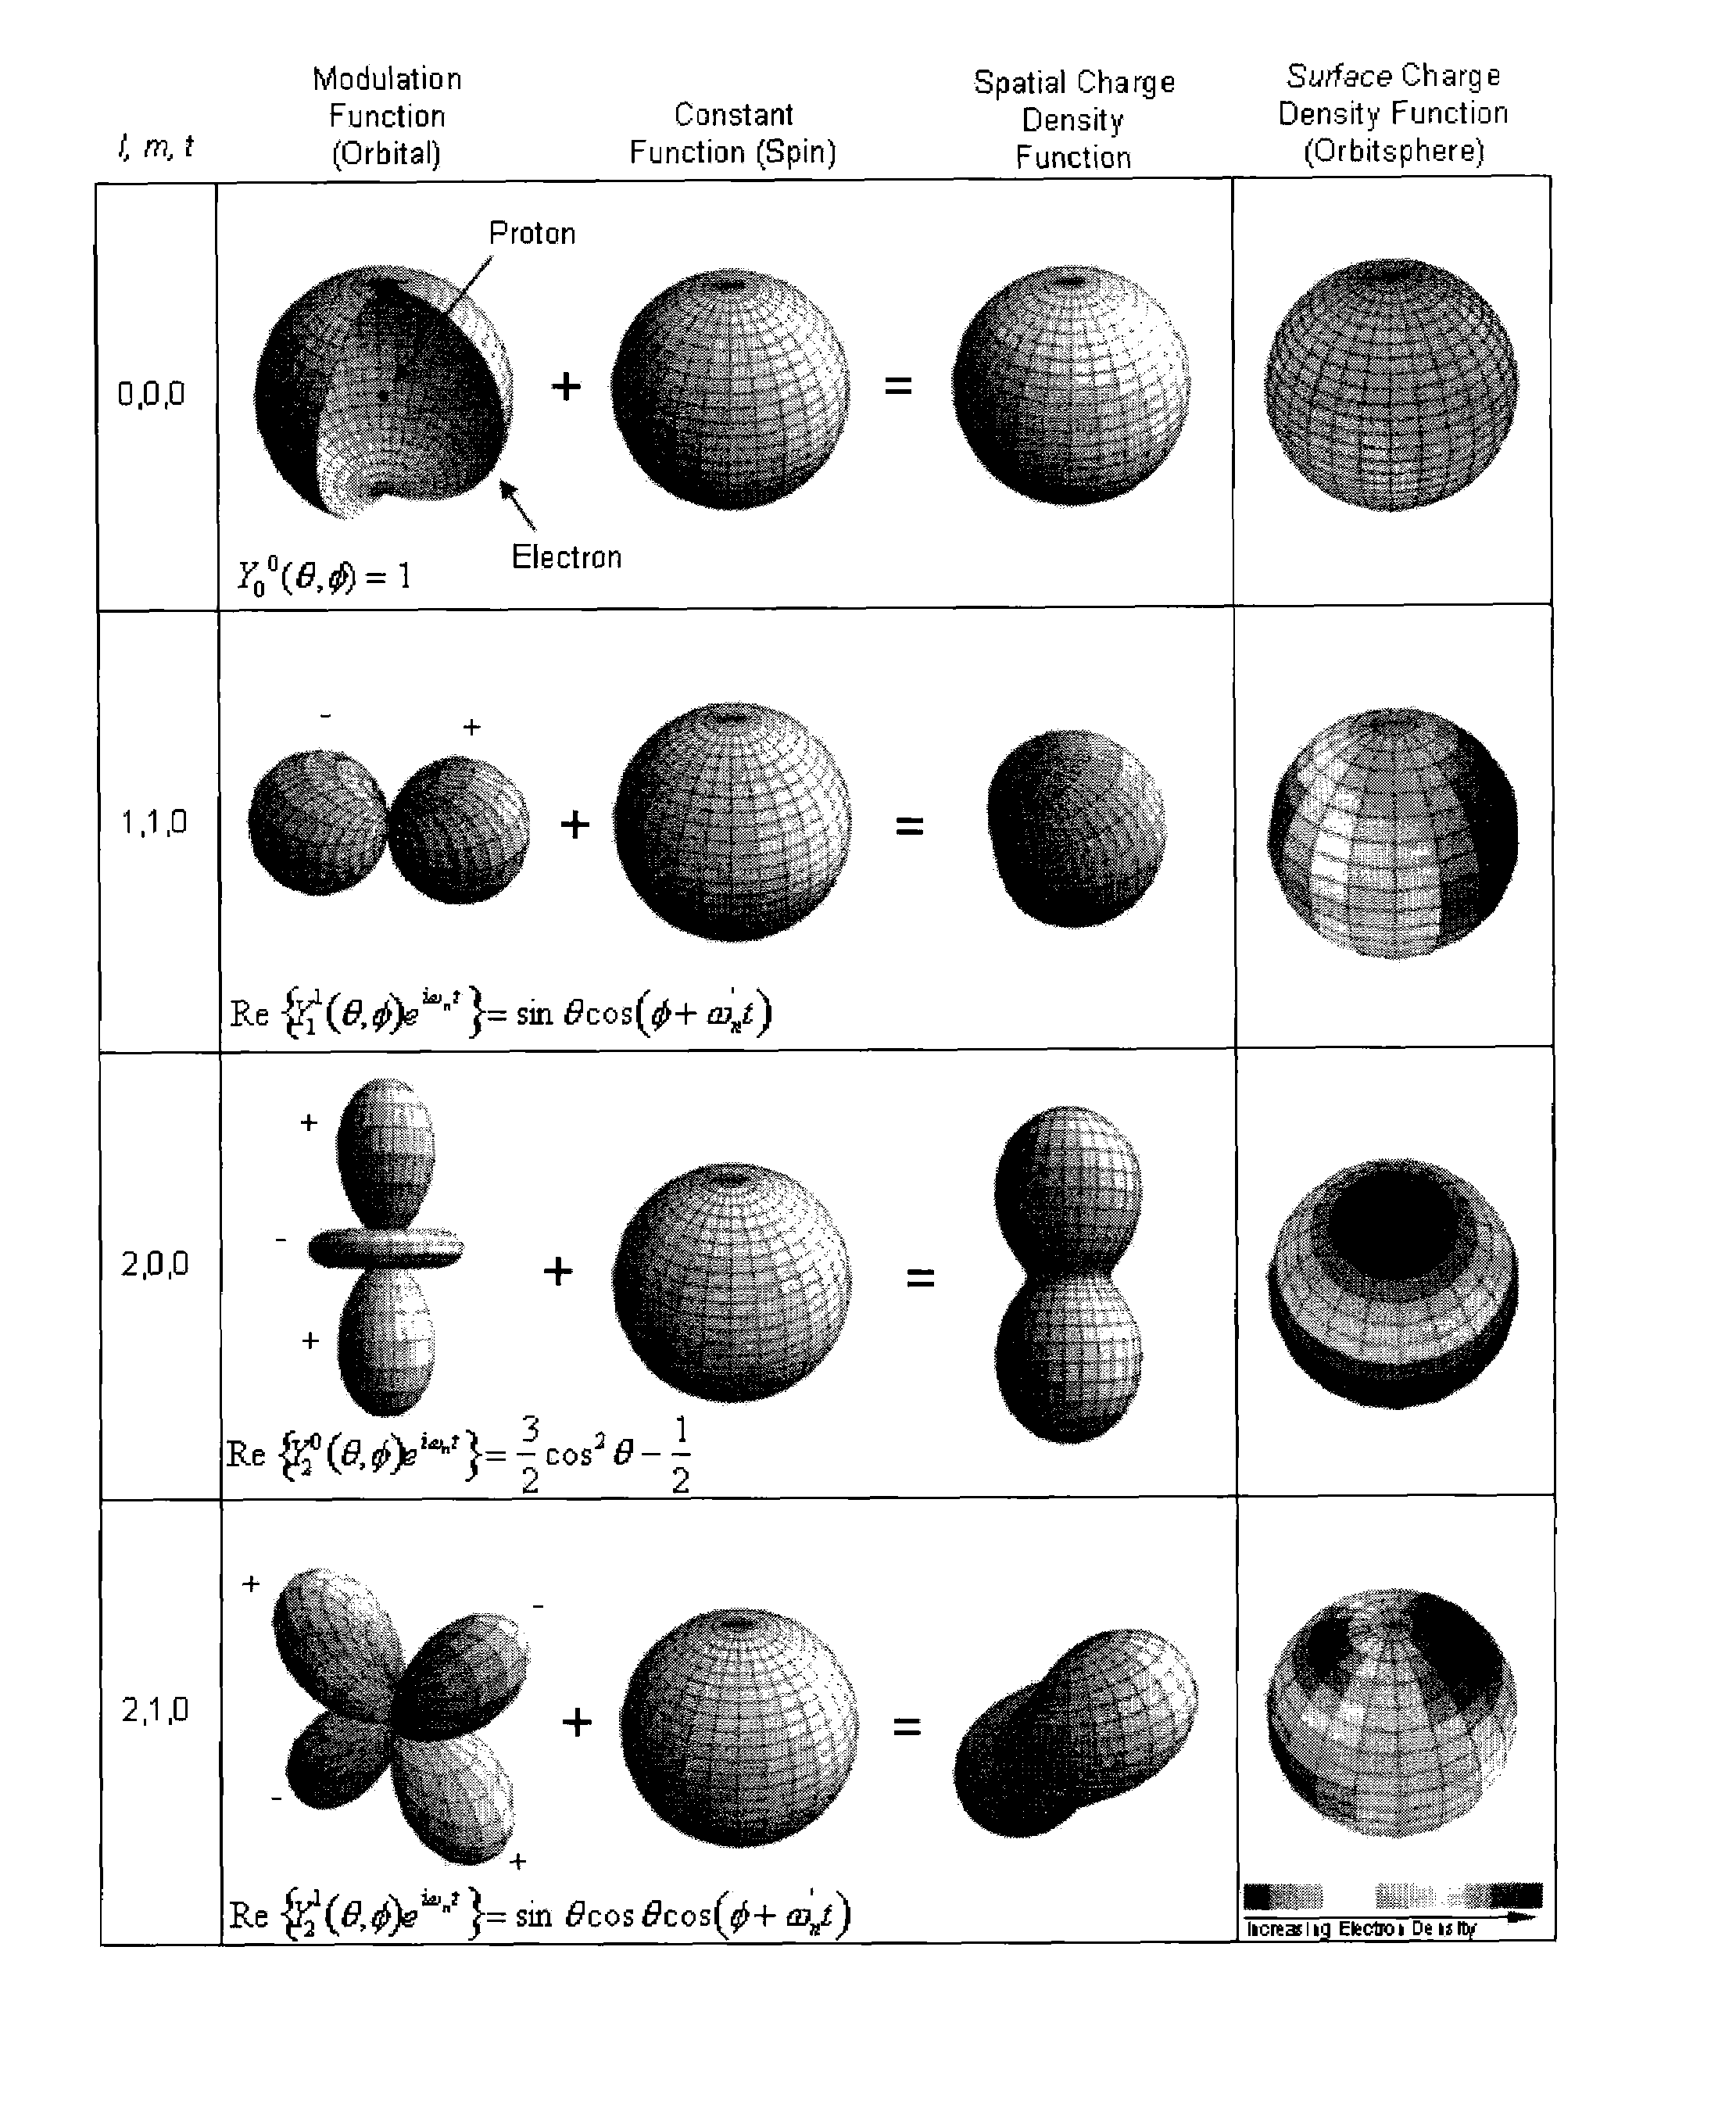 System and Method of Computing and Rendering the Nature of Dipole Moments, Condensed Matter, and Reaction Kinetics